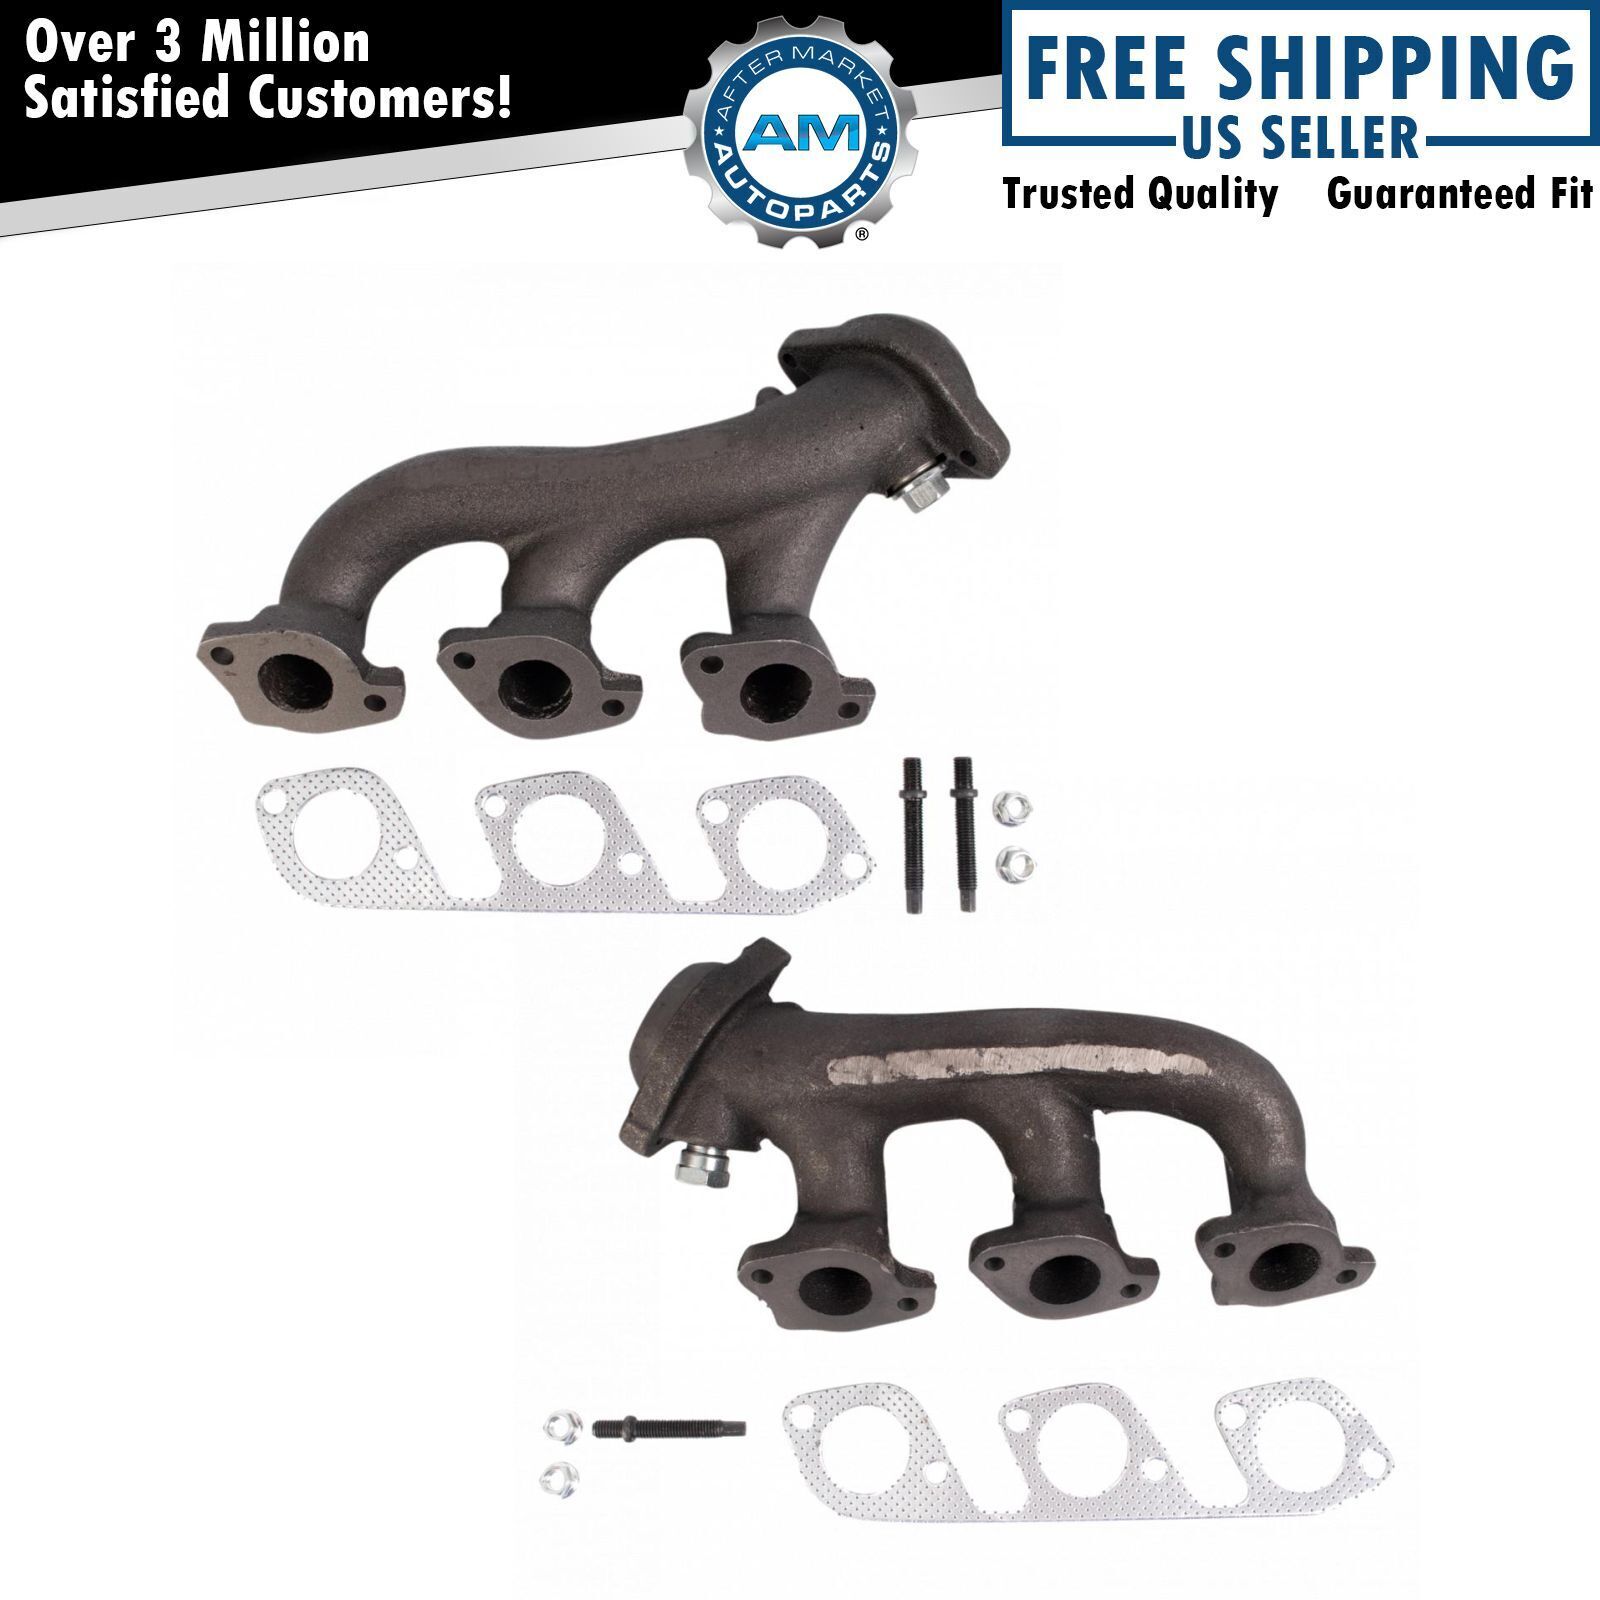 Exhaust Manifold w/ Gaskets Kit LH & RH Sides for Ford F150 E150 V6 4.2L